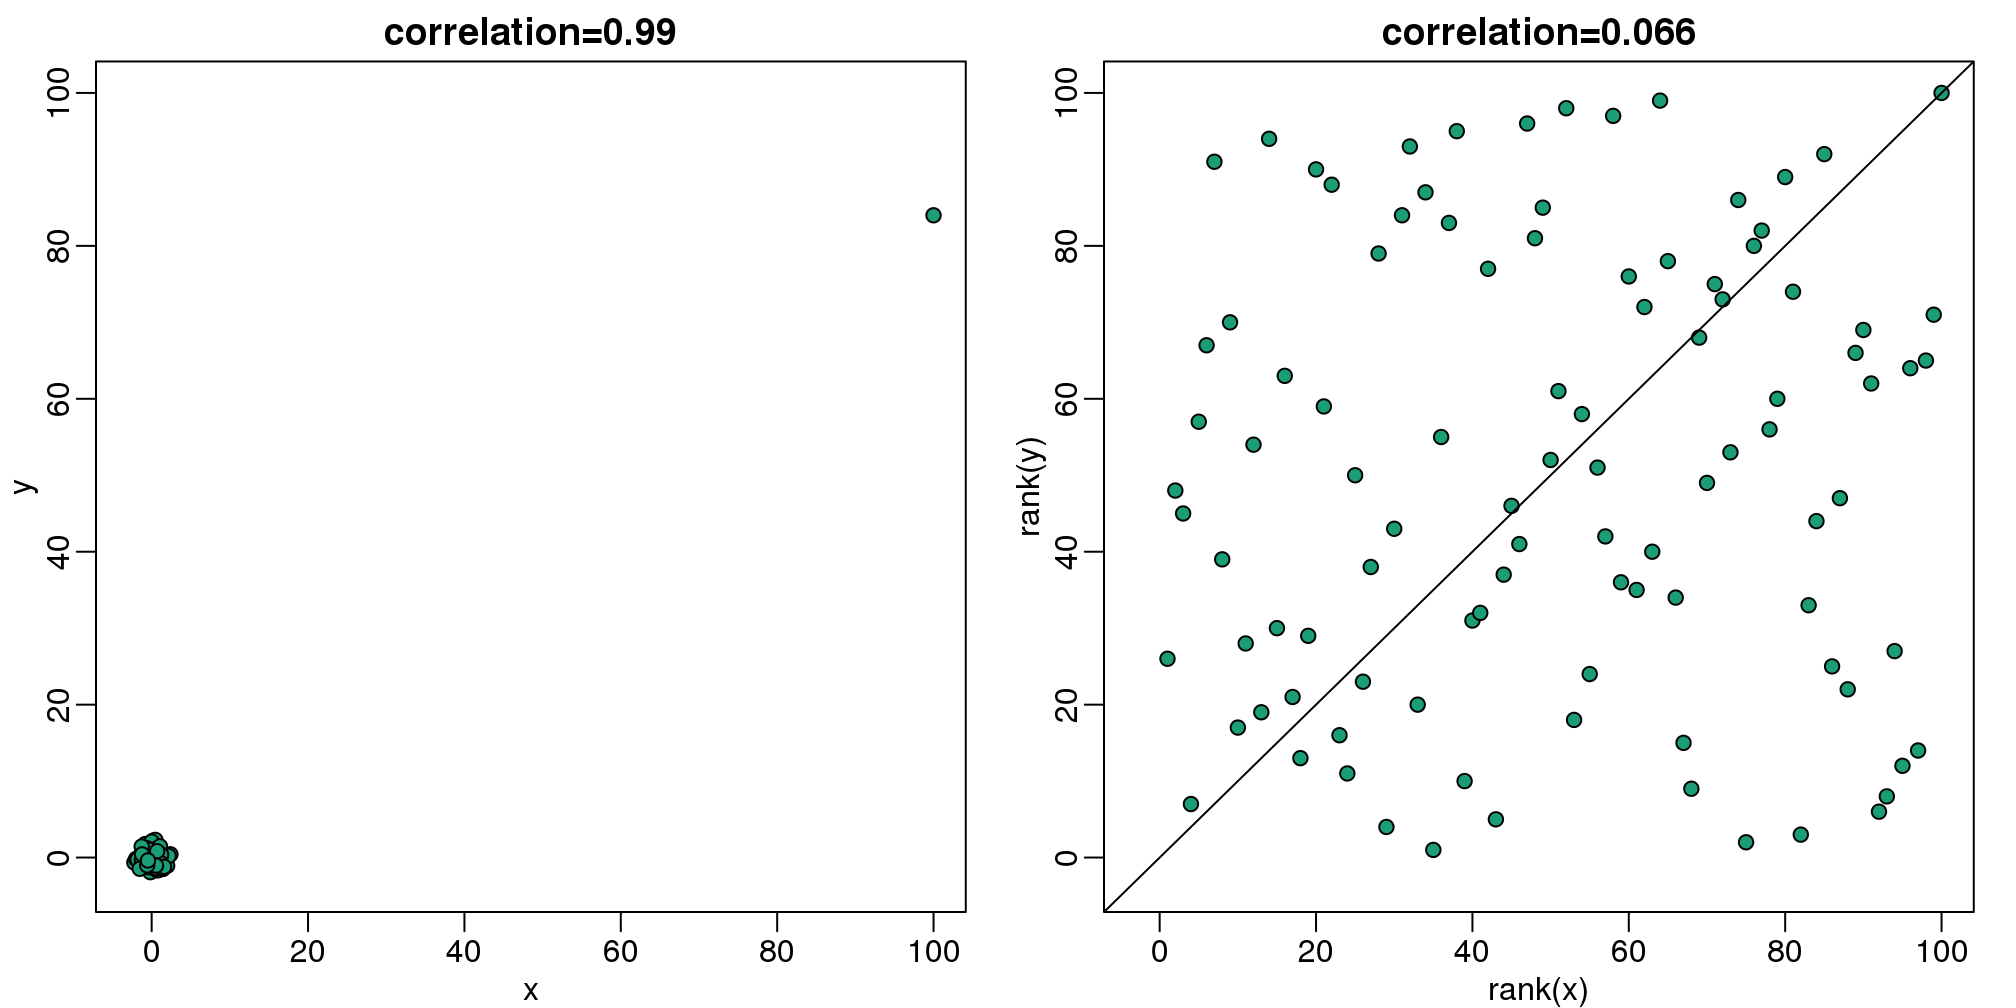 Scatterplot of original data (left) and ranks (right). Spearman correlation reduces the influence of outliers by considering the ranks instead of original data.